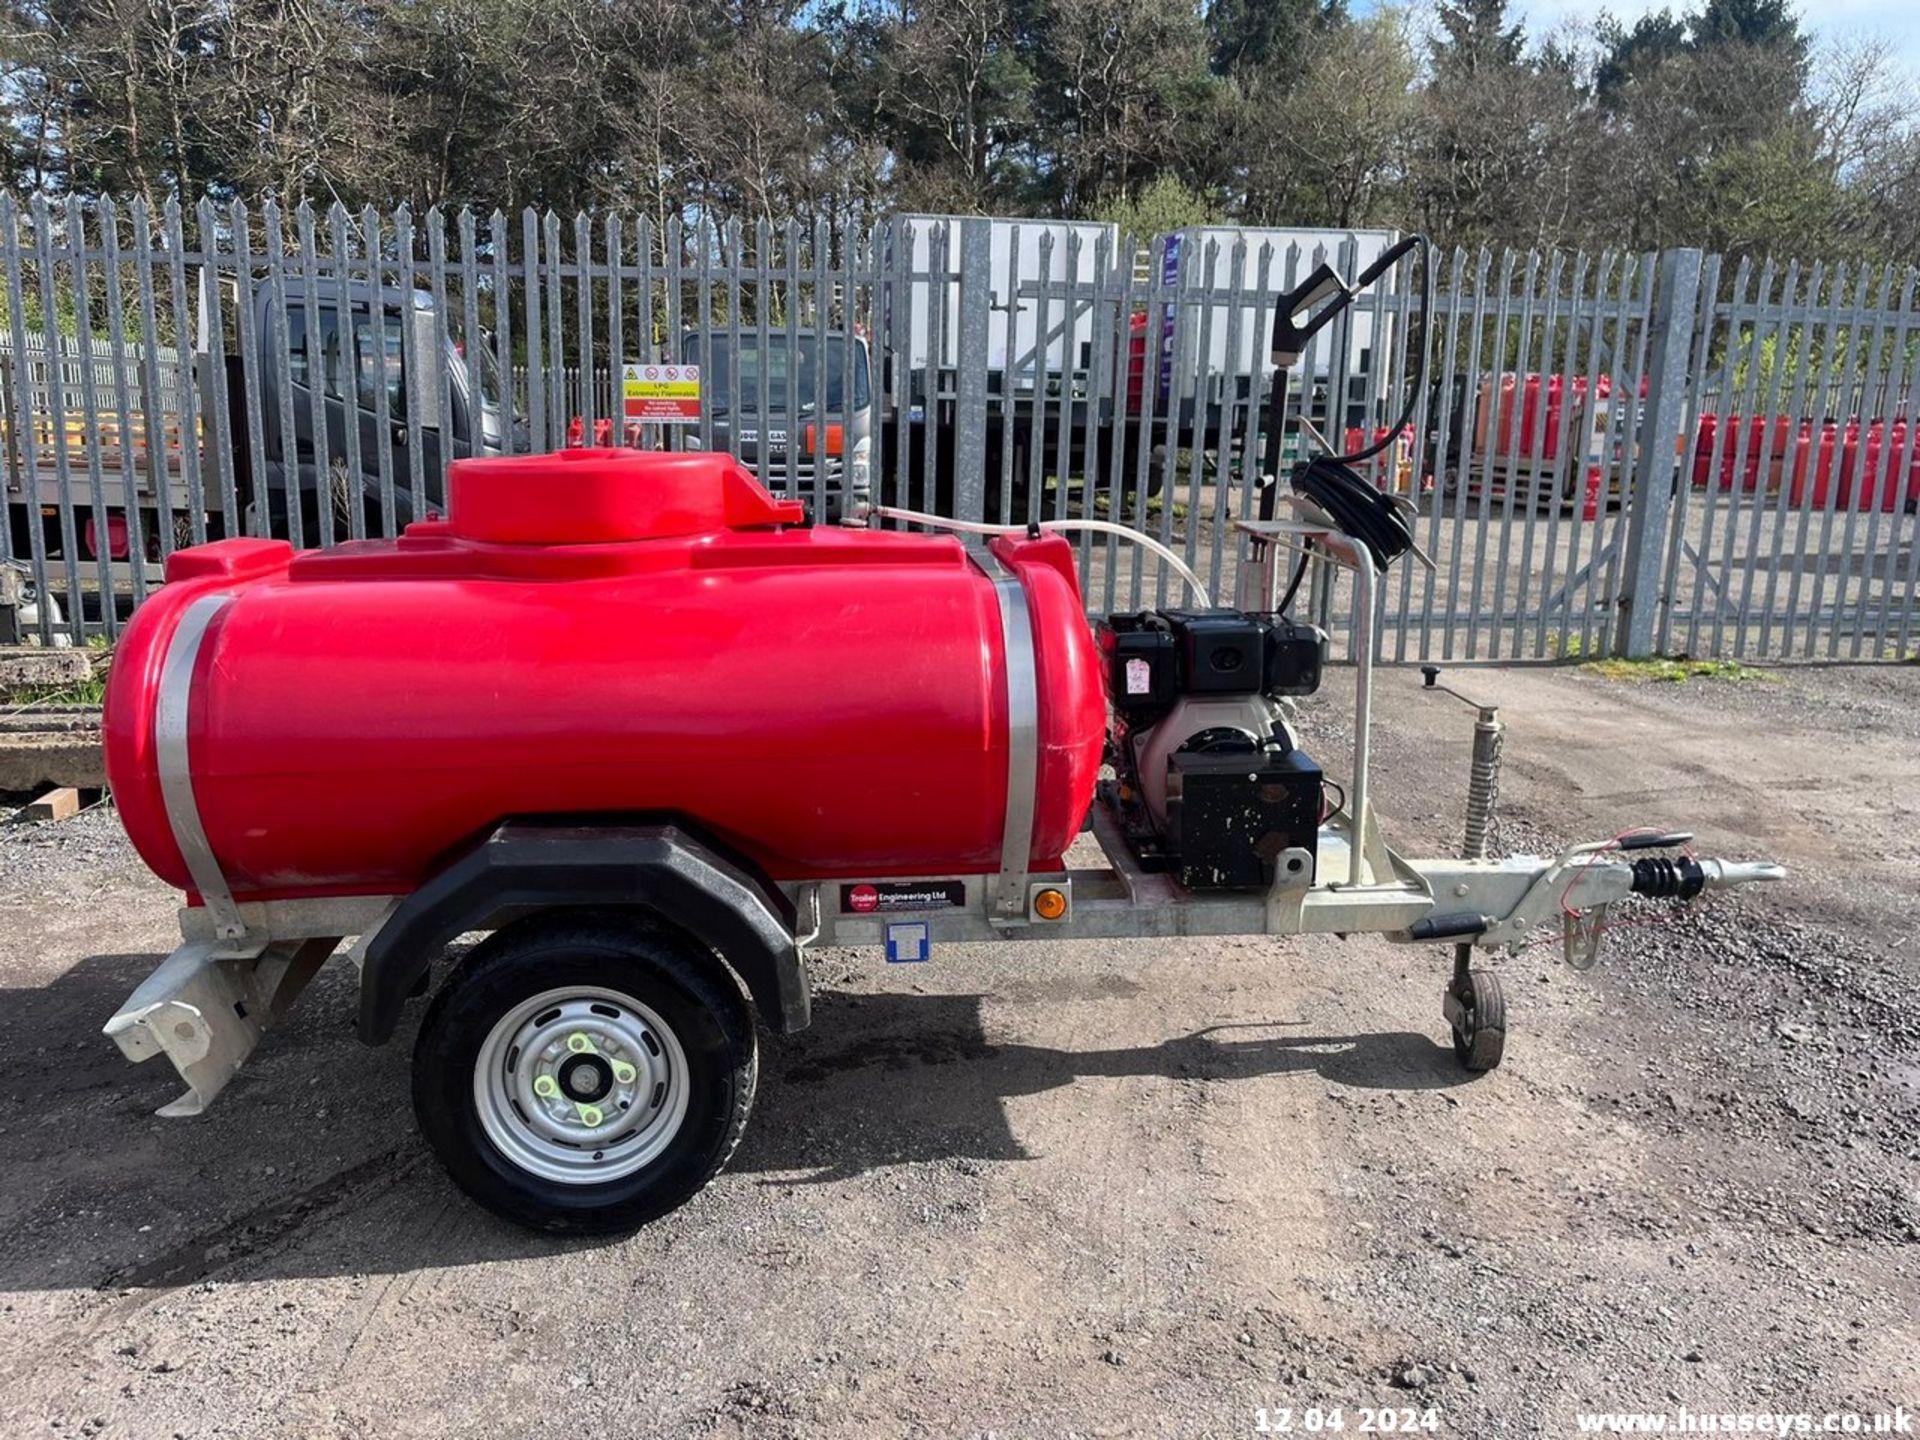 TRAILER ENGINEERING 250 GALLON FAST TOW WASHER BOWSER 2021 ELEC START YANMAR DIESEL WASHER - Image 3 of 12